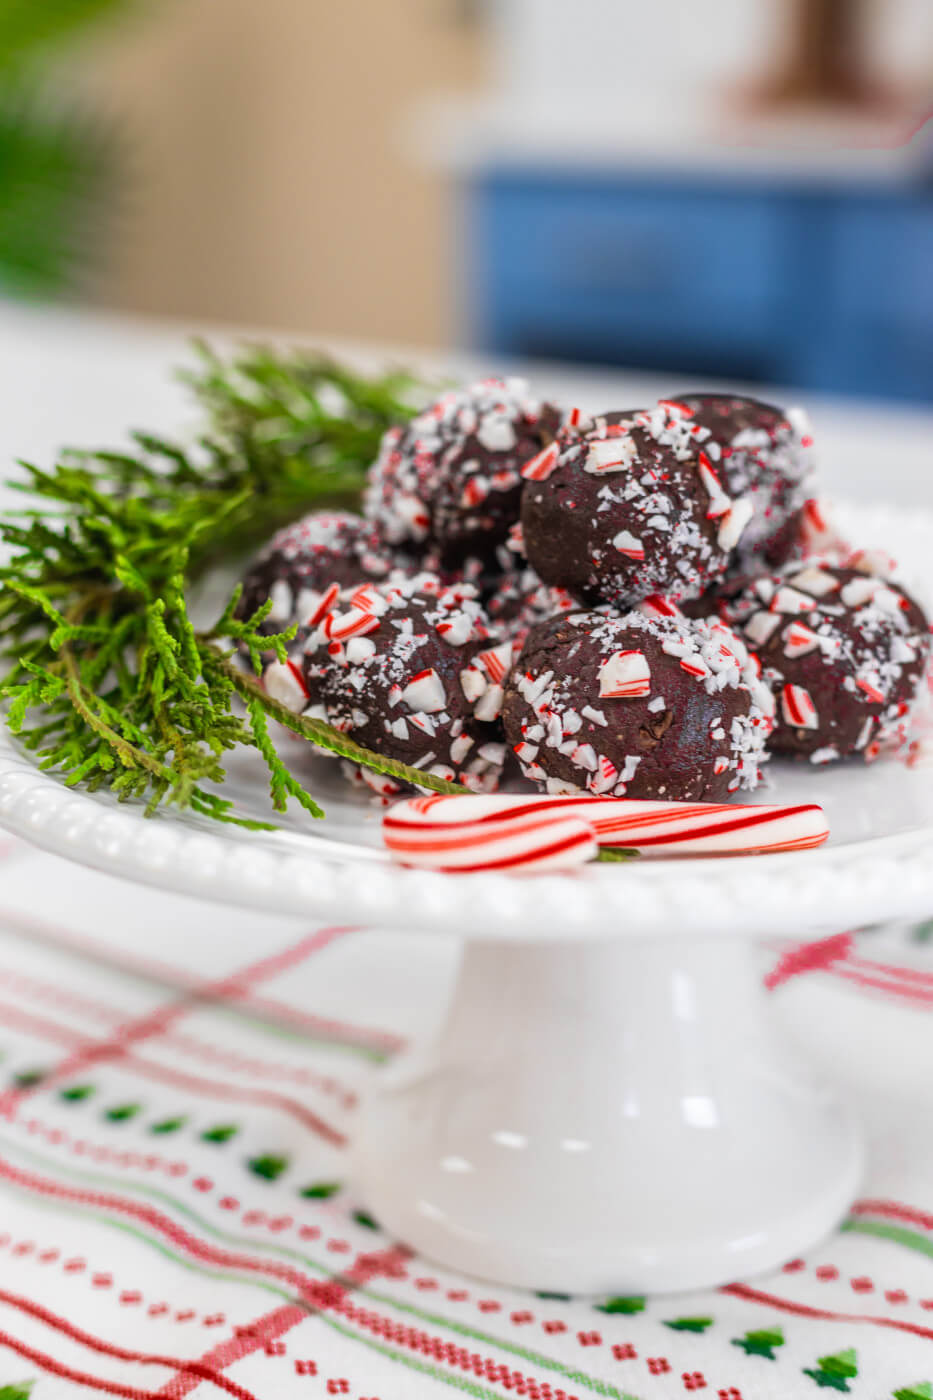 No Bake Peppermint Protein Balls on platter | Bariatric Recipes by Celebrate Vitamins